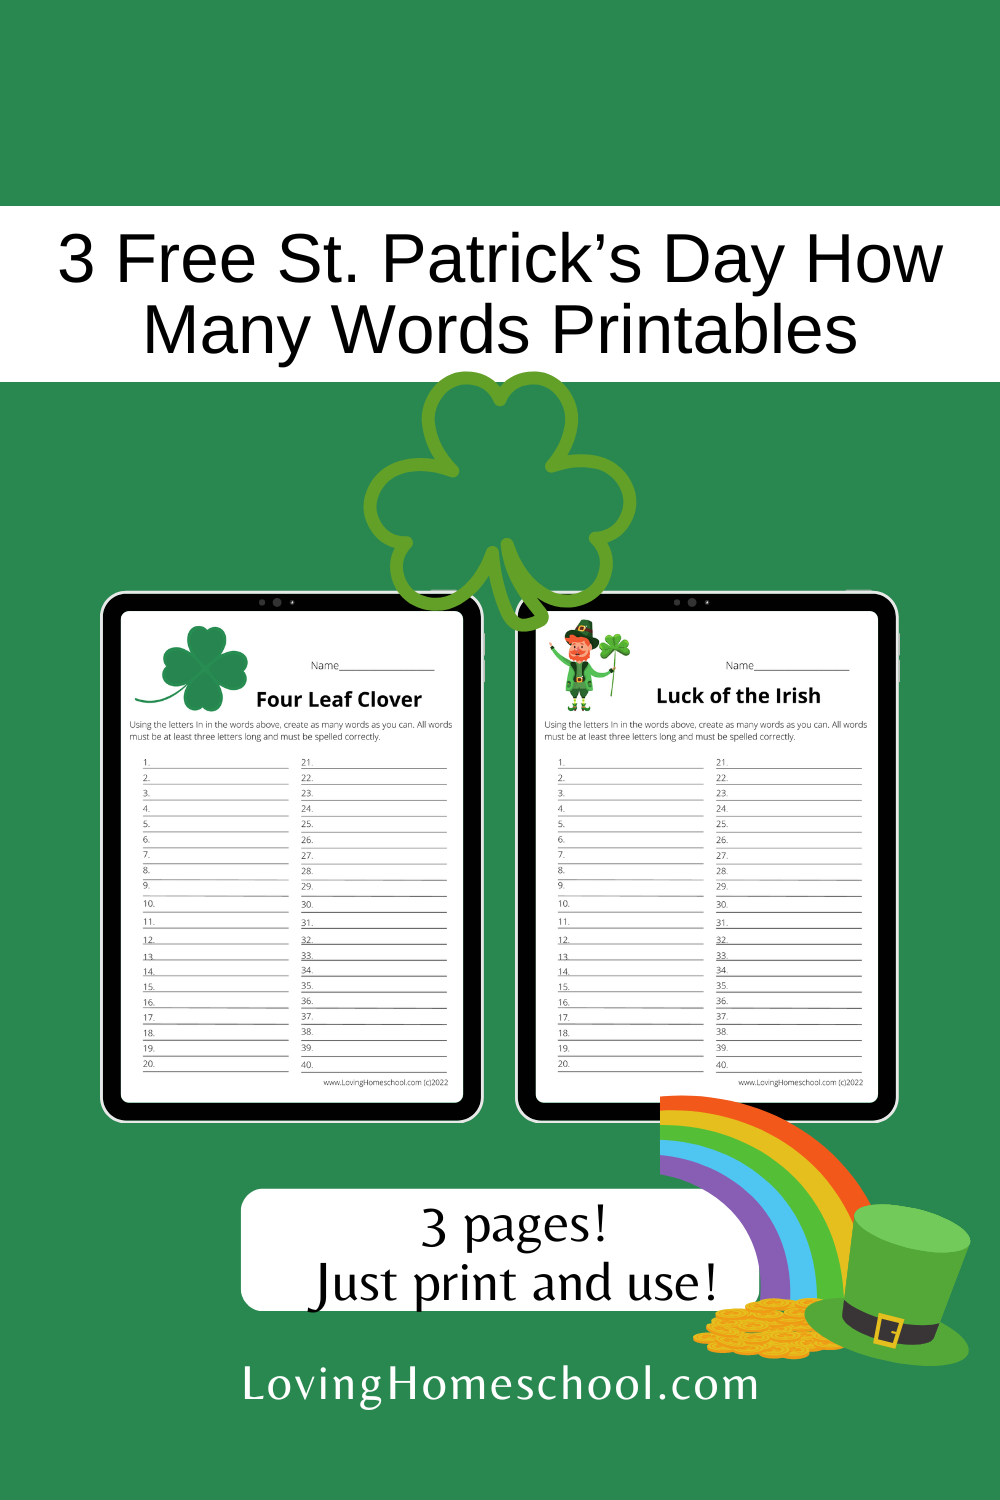 Free St. Patrick’s Day How Many Words Printables Pinterest Pin